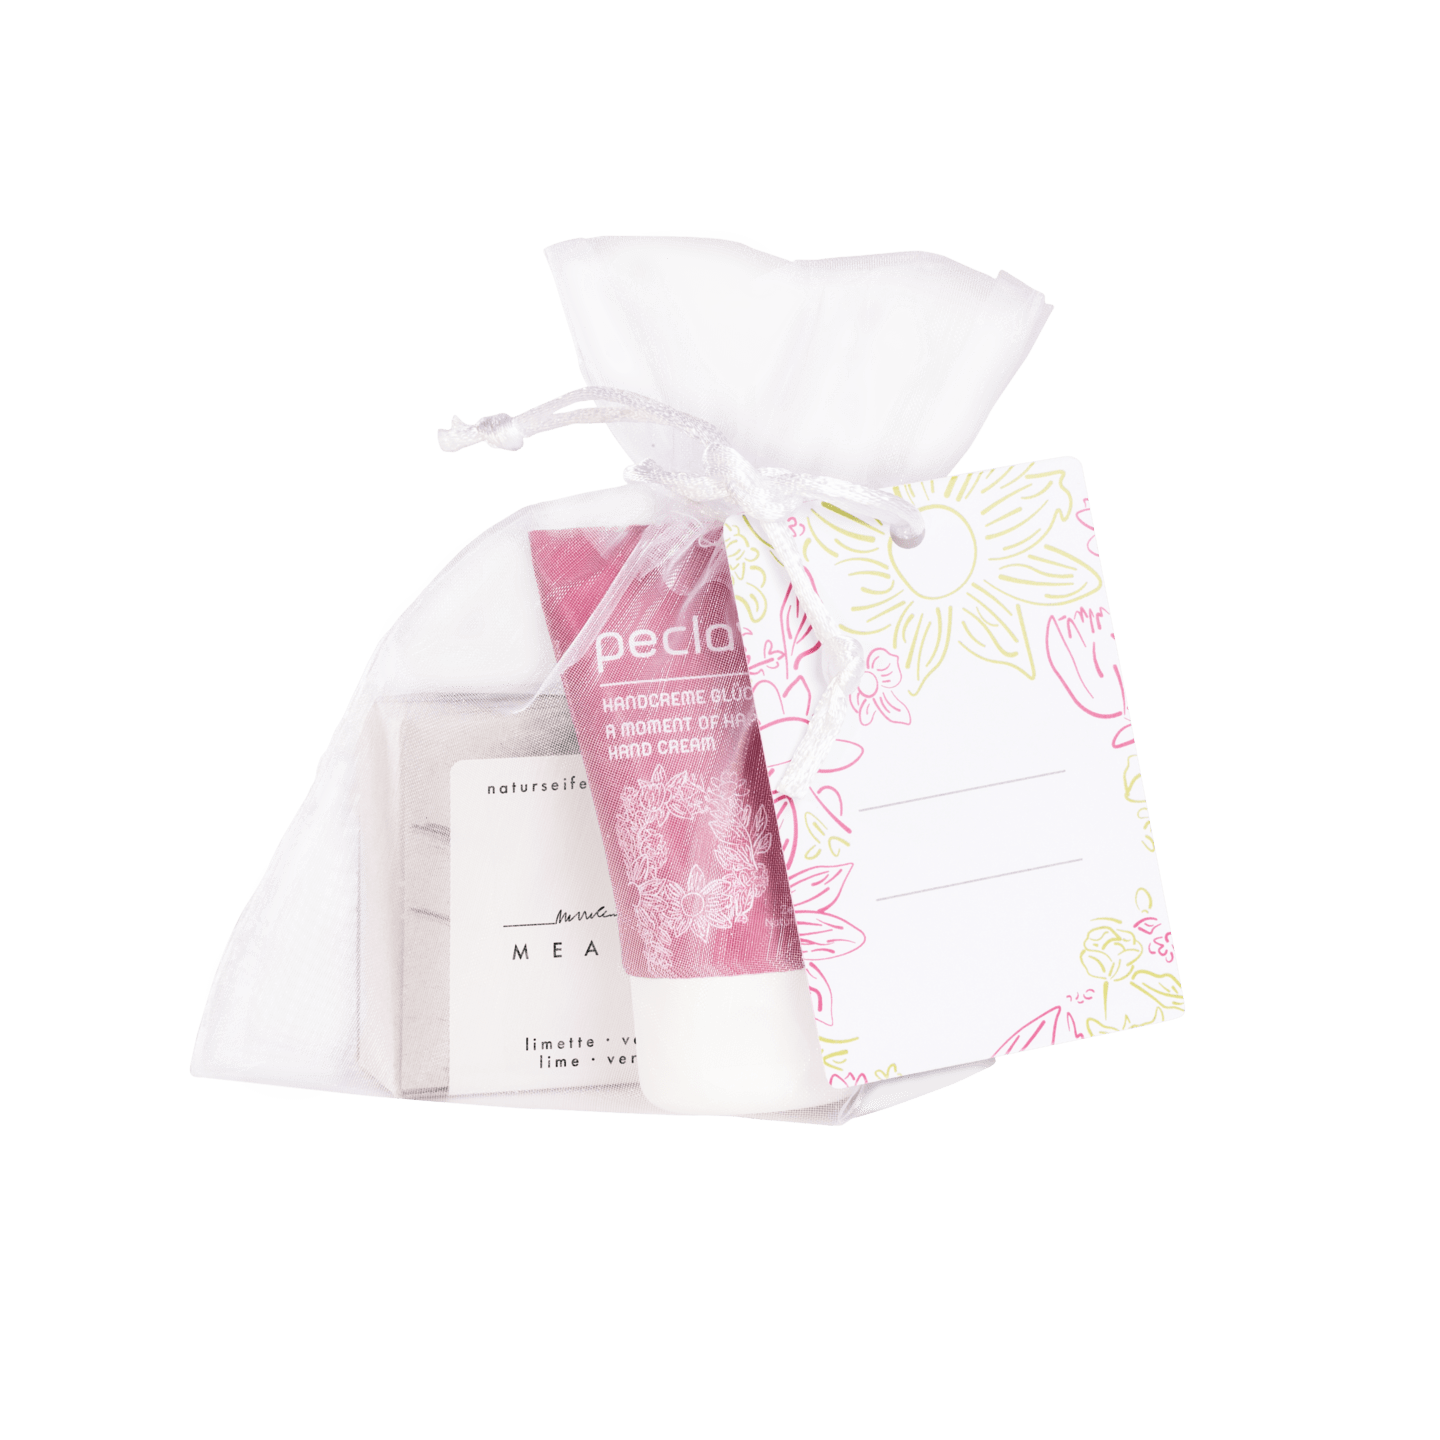 A Moment of Happiness Gift Set incl. Hand Cream 30ml and Natural Soap Meadow, 50g, lime and verbena